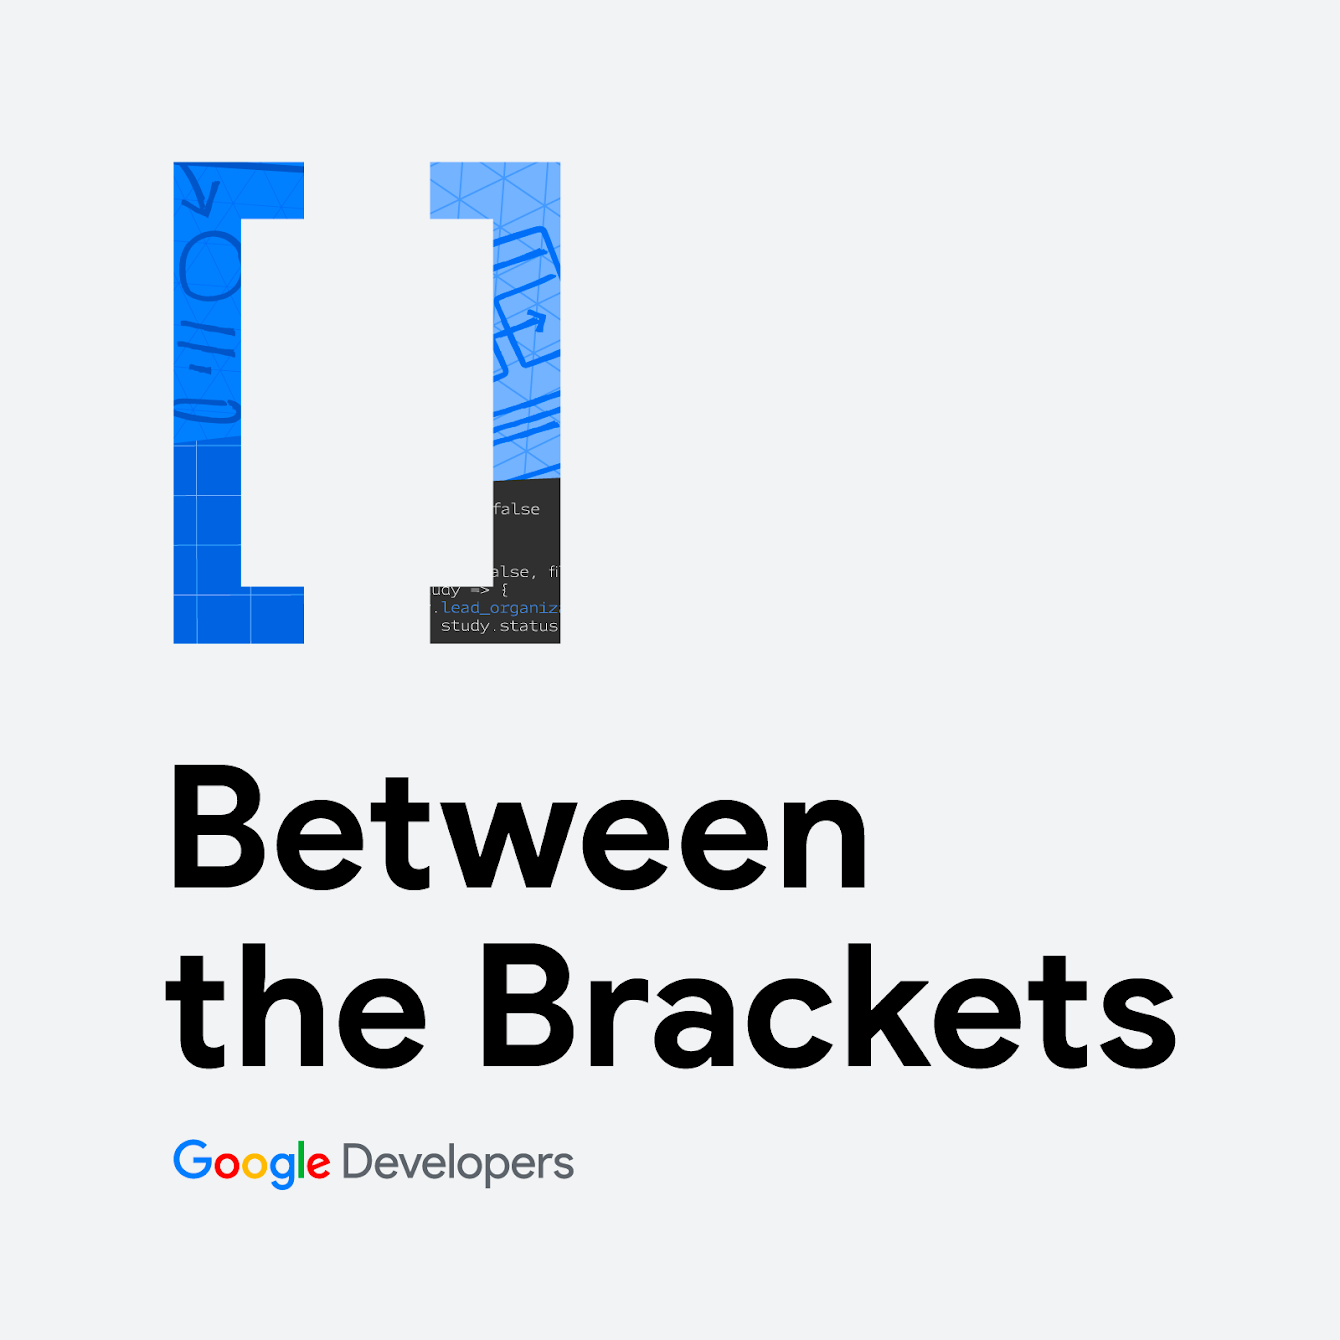 An image with grey background and the text Between the Brackets with the logo of Google Developers below